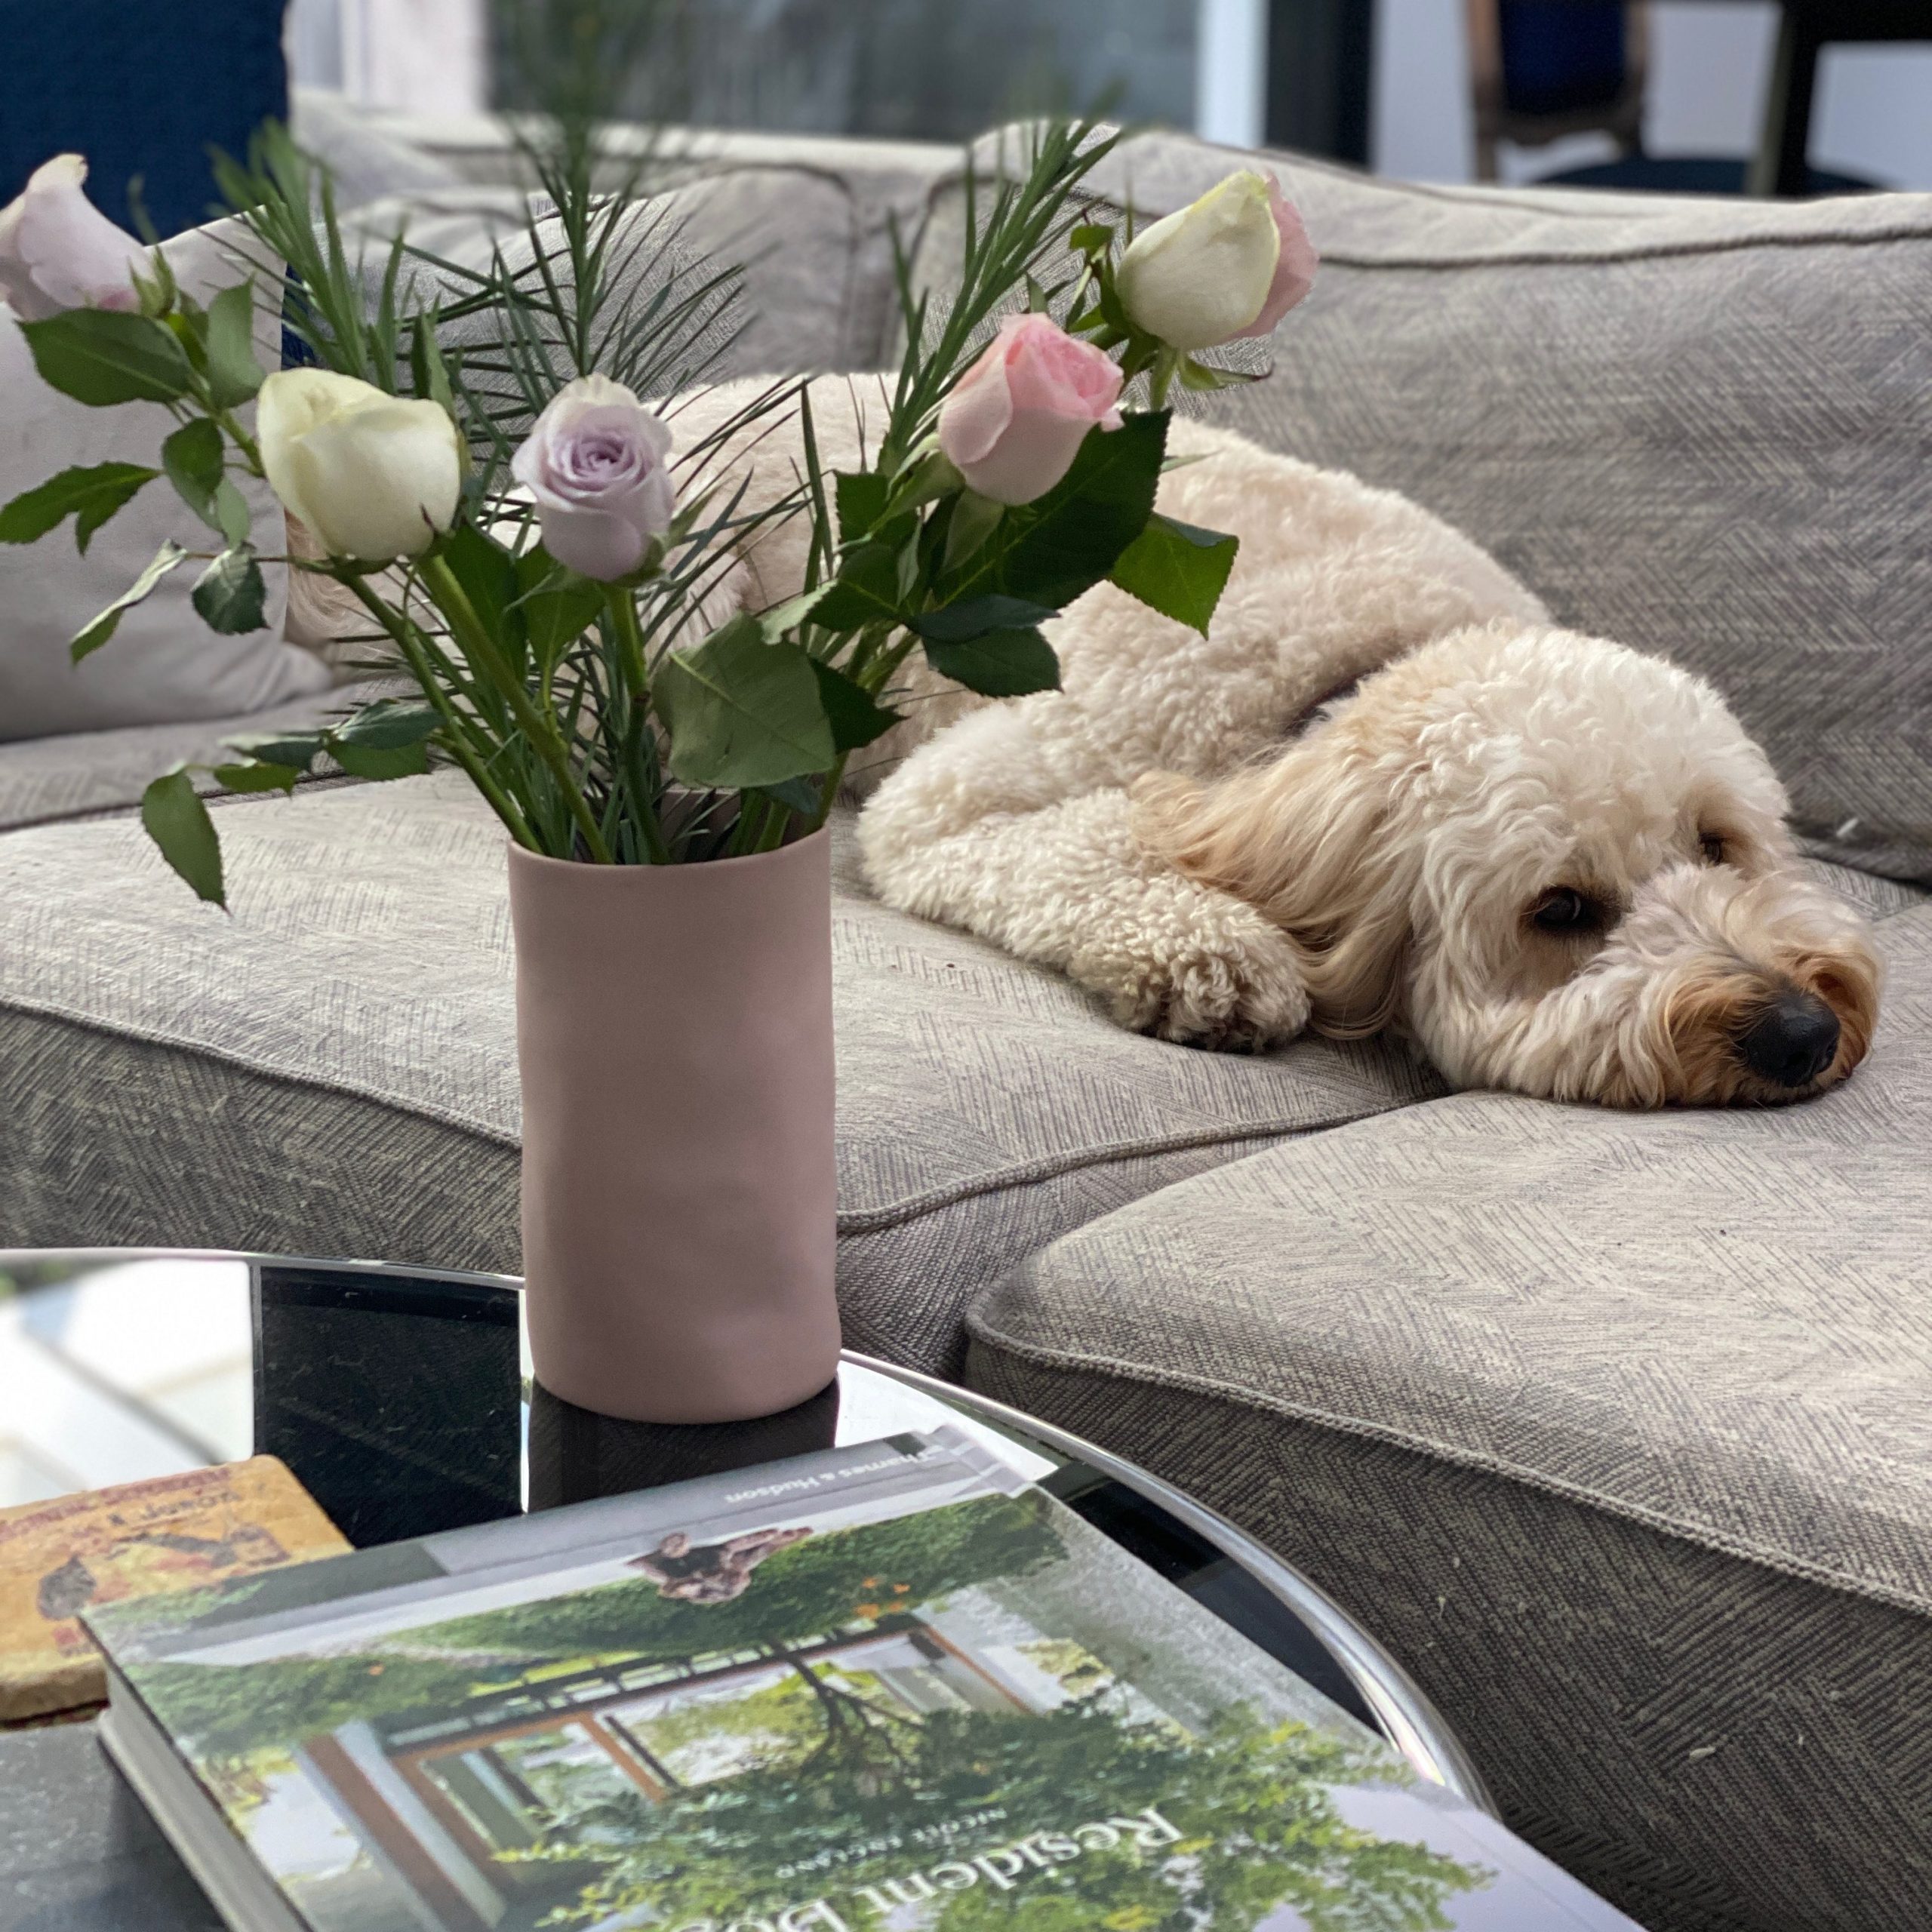 Lenny the dog next to beautiful roses on the lounge